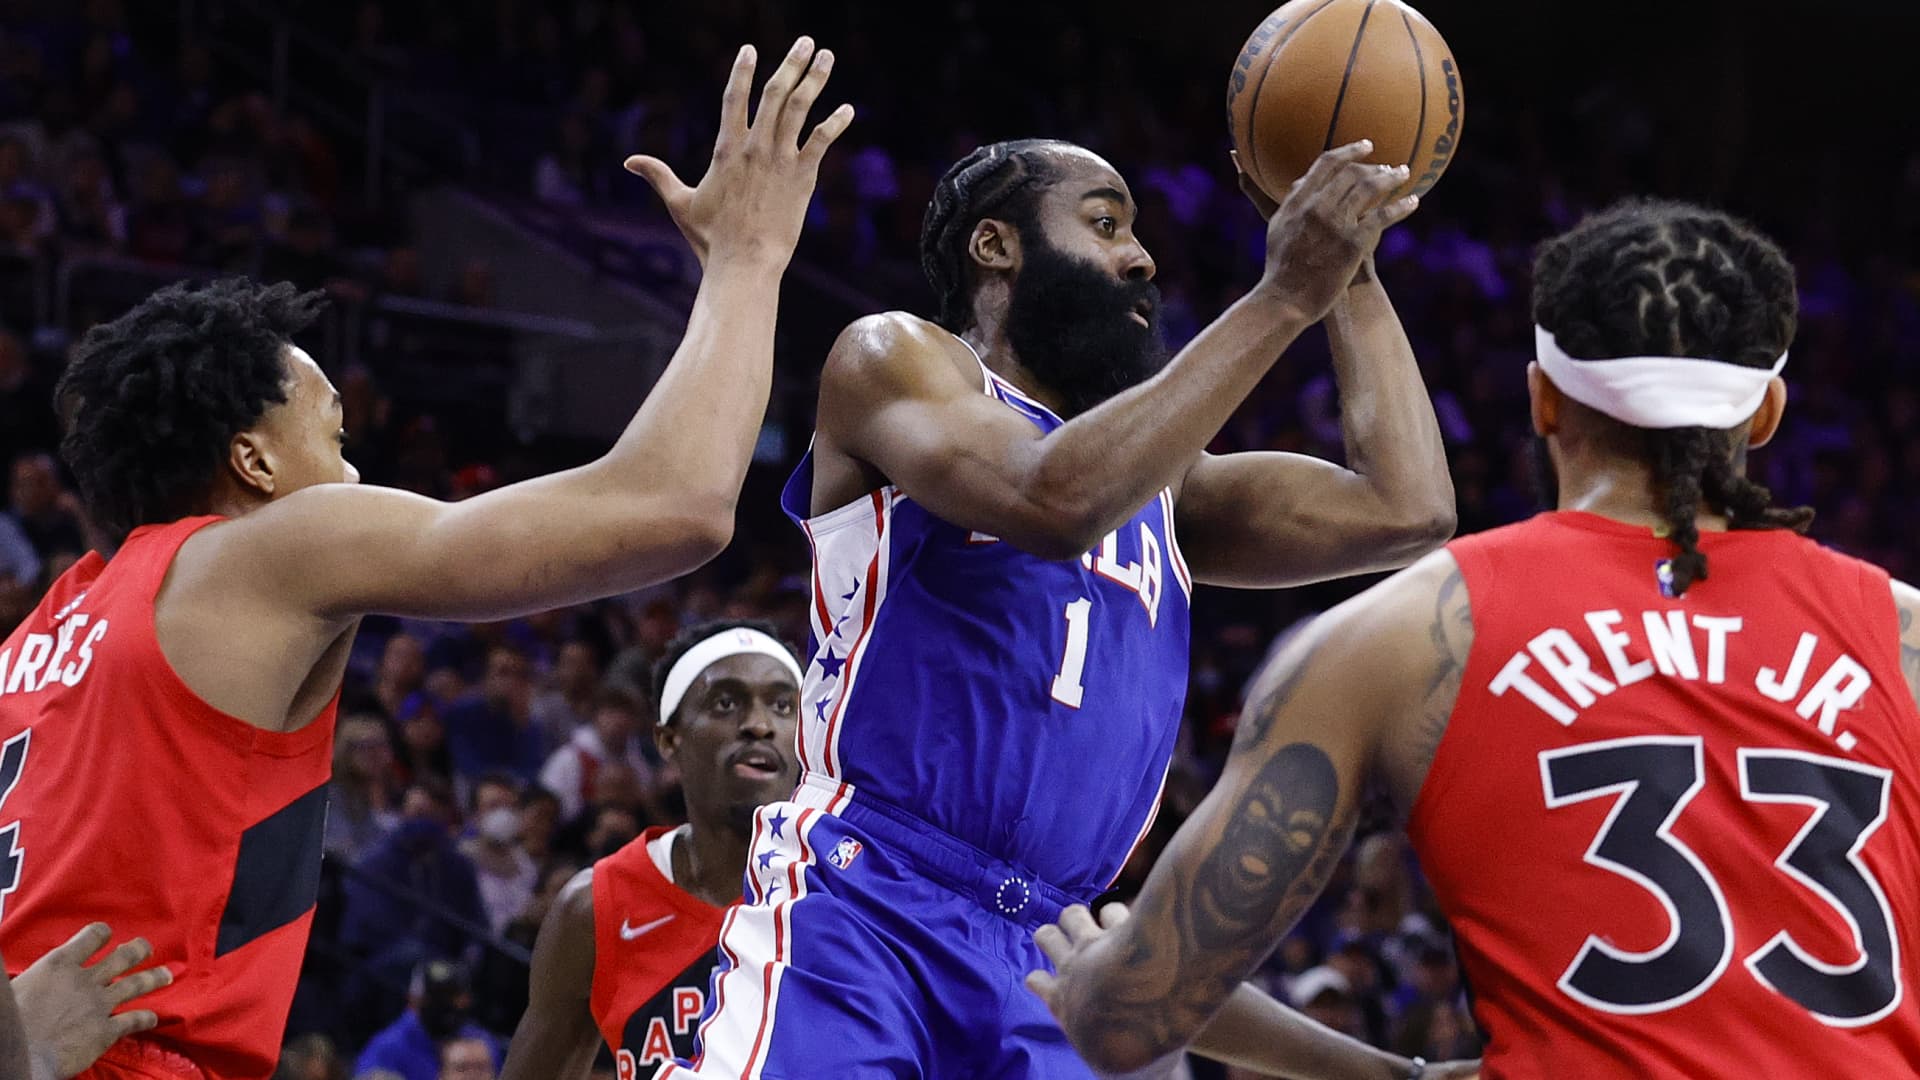 NBA star James Harden is putting his nonprofit’s support behind an effort to boost financial literacy among young adults